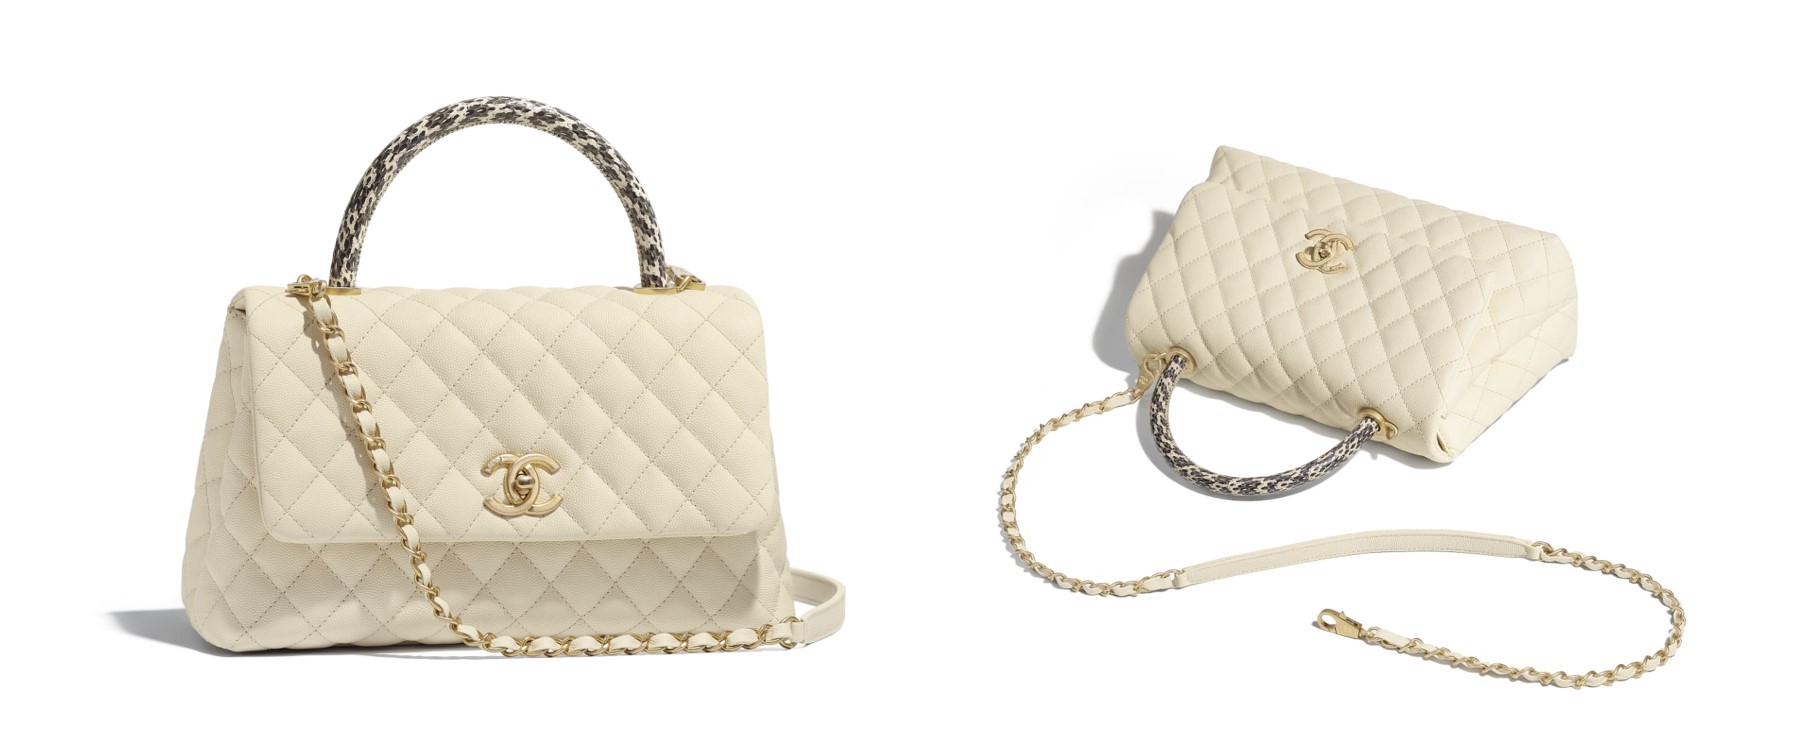 10 Best Chanel bags to buy this season creme flap Chanel top handle flap bag 